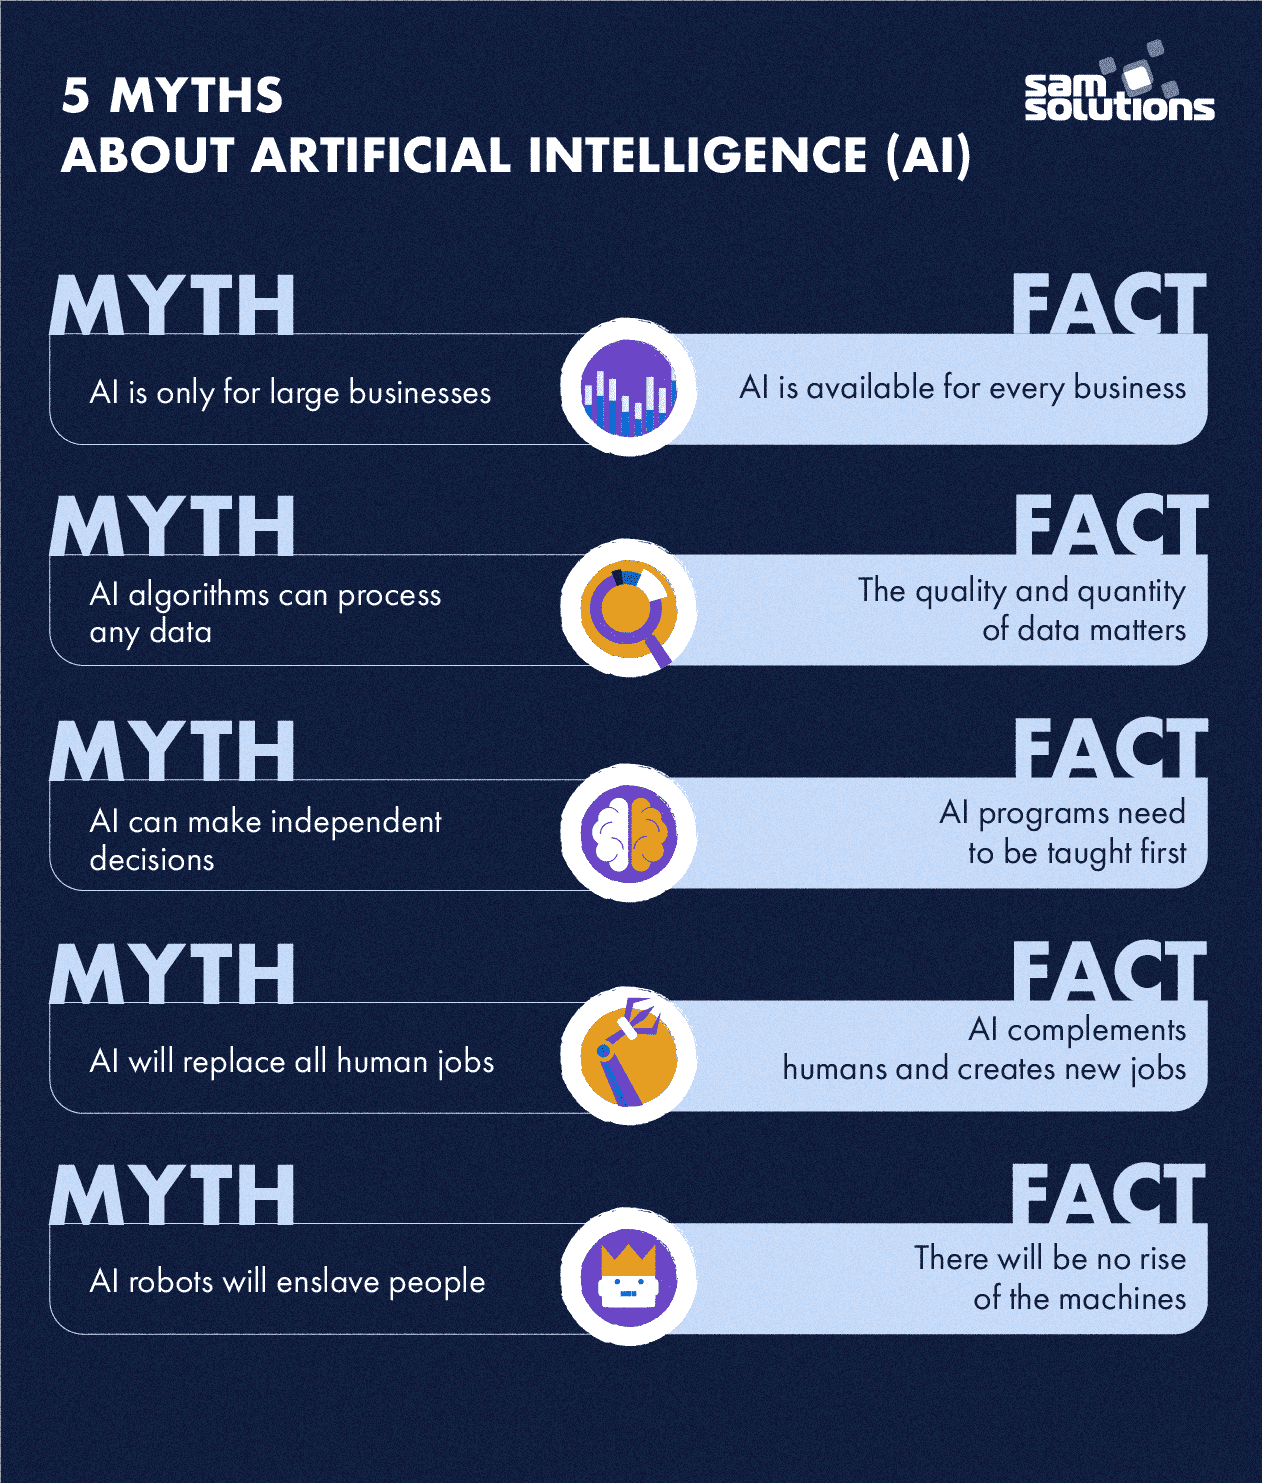 Myths-and-Facts-about-Artificial-Intelligence.png